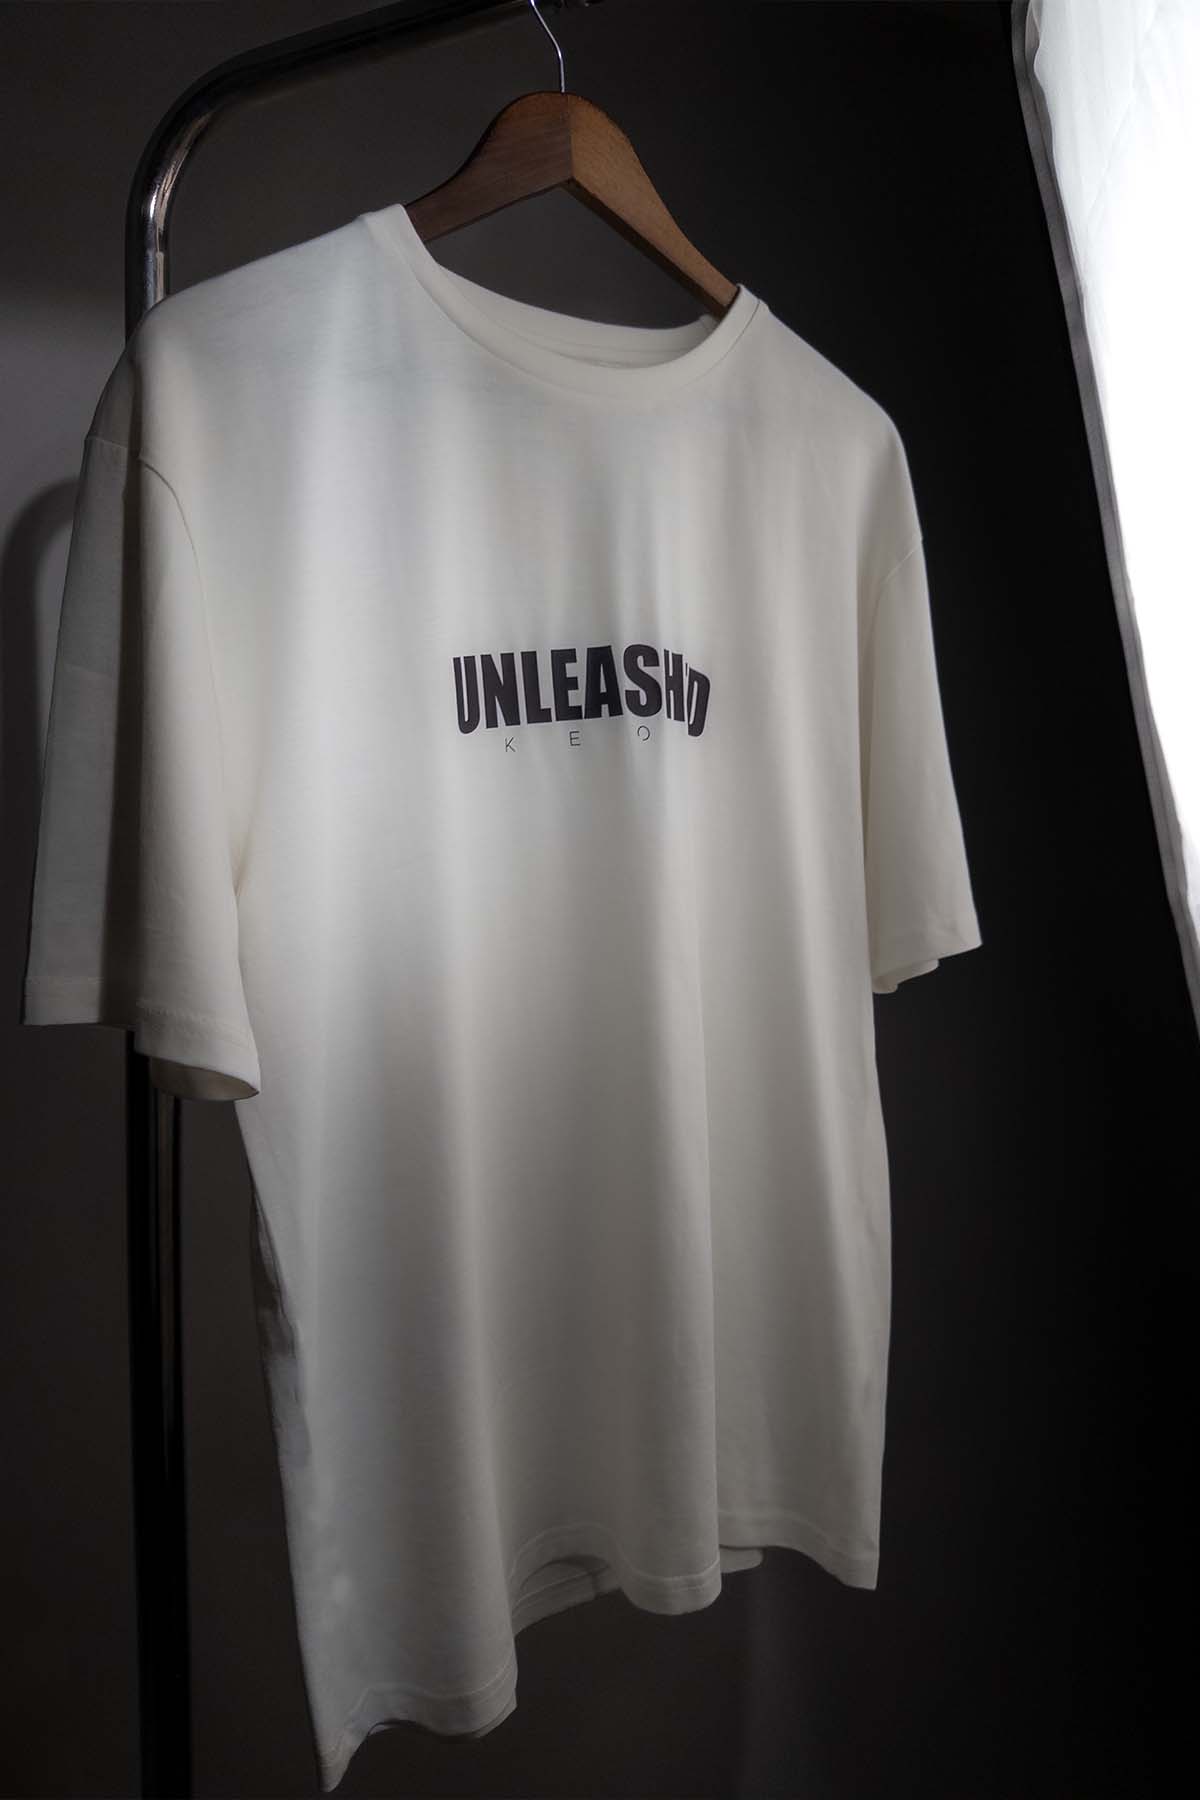 Unleashed Urban Fit Oversize T-shirt - keos.life